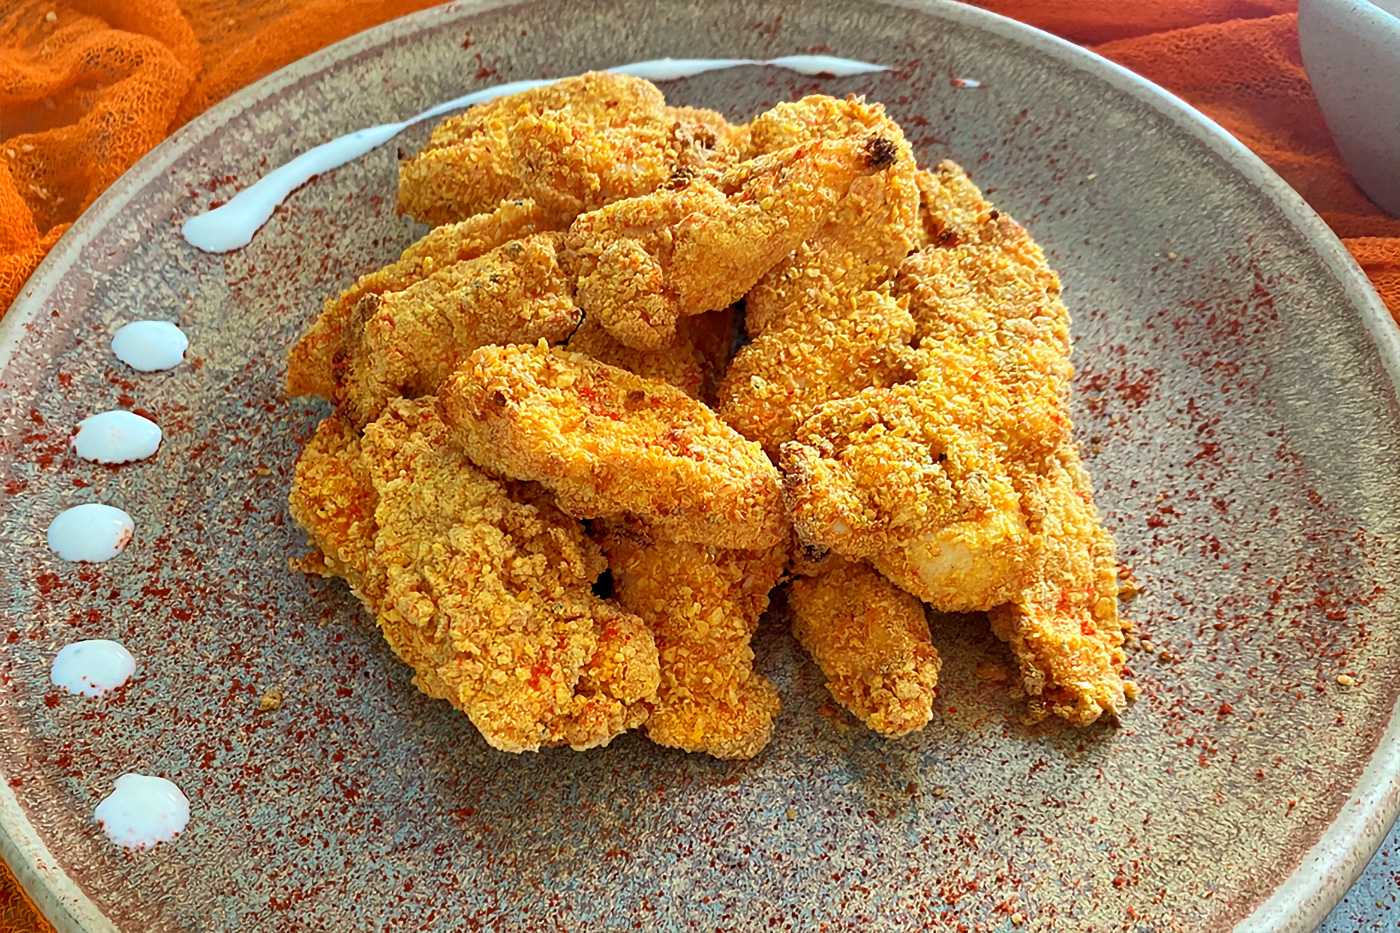 Homemade chicken nuggets coated with bread crumbs and paprika on a grey plate